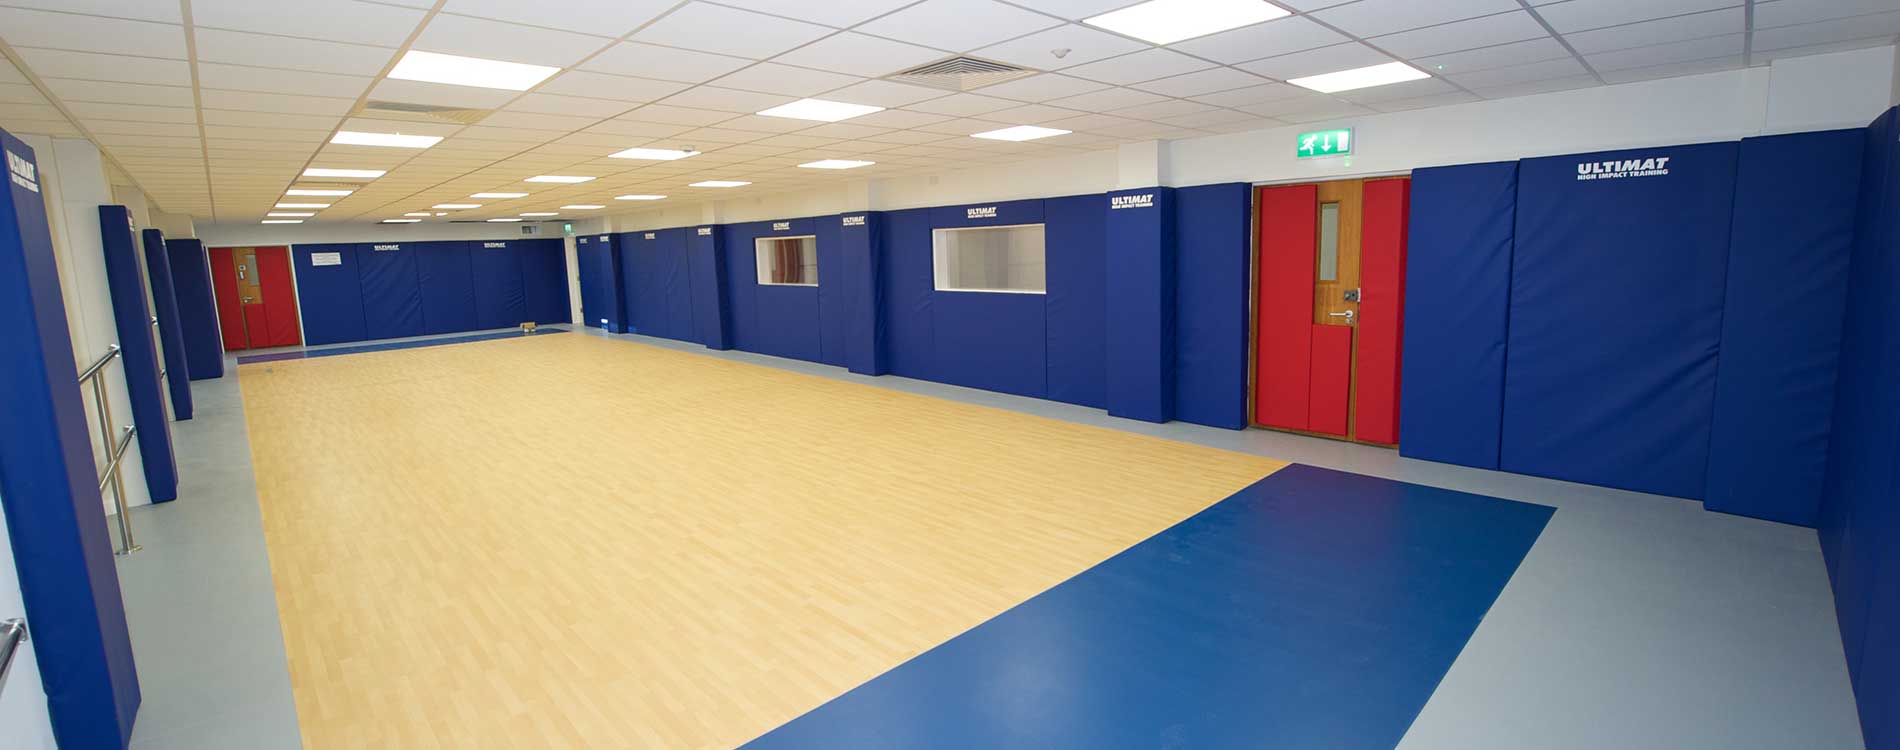 Gymnasium with blue padded walls after a large renovation